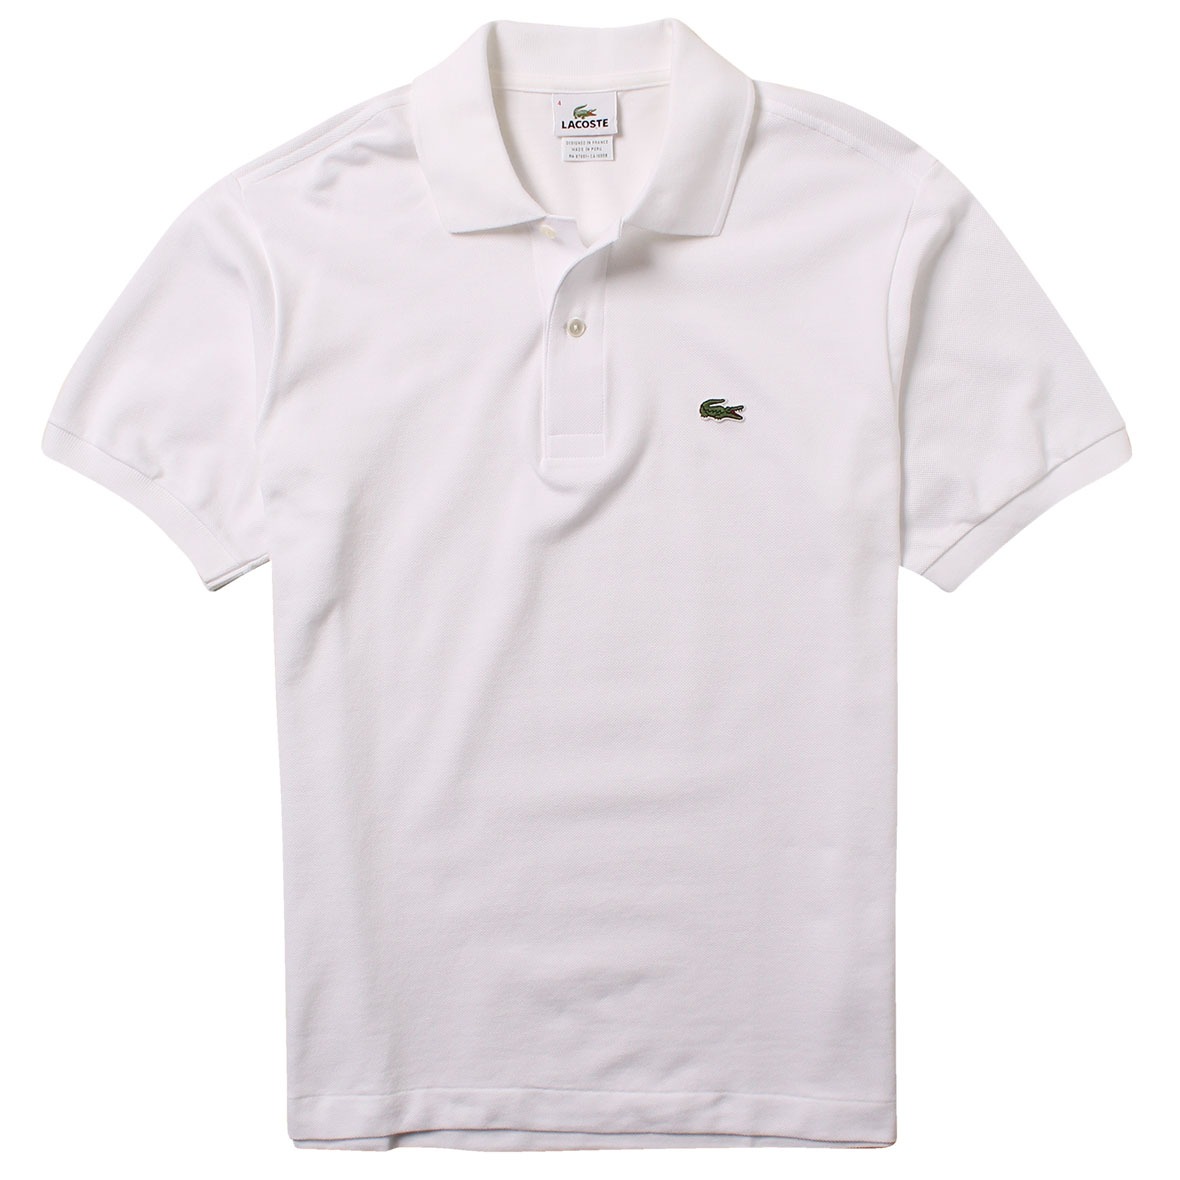 Lacoste WHITE Men's Classic Fit Short Sleeve Polo Shirt, US 2X-Large - image 4 of 4